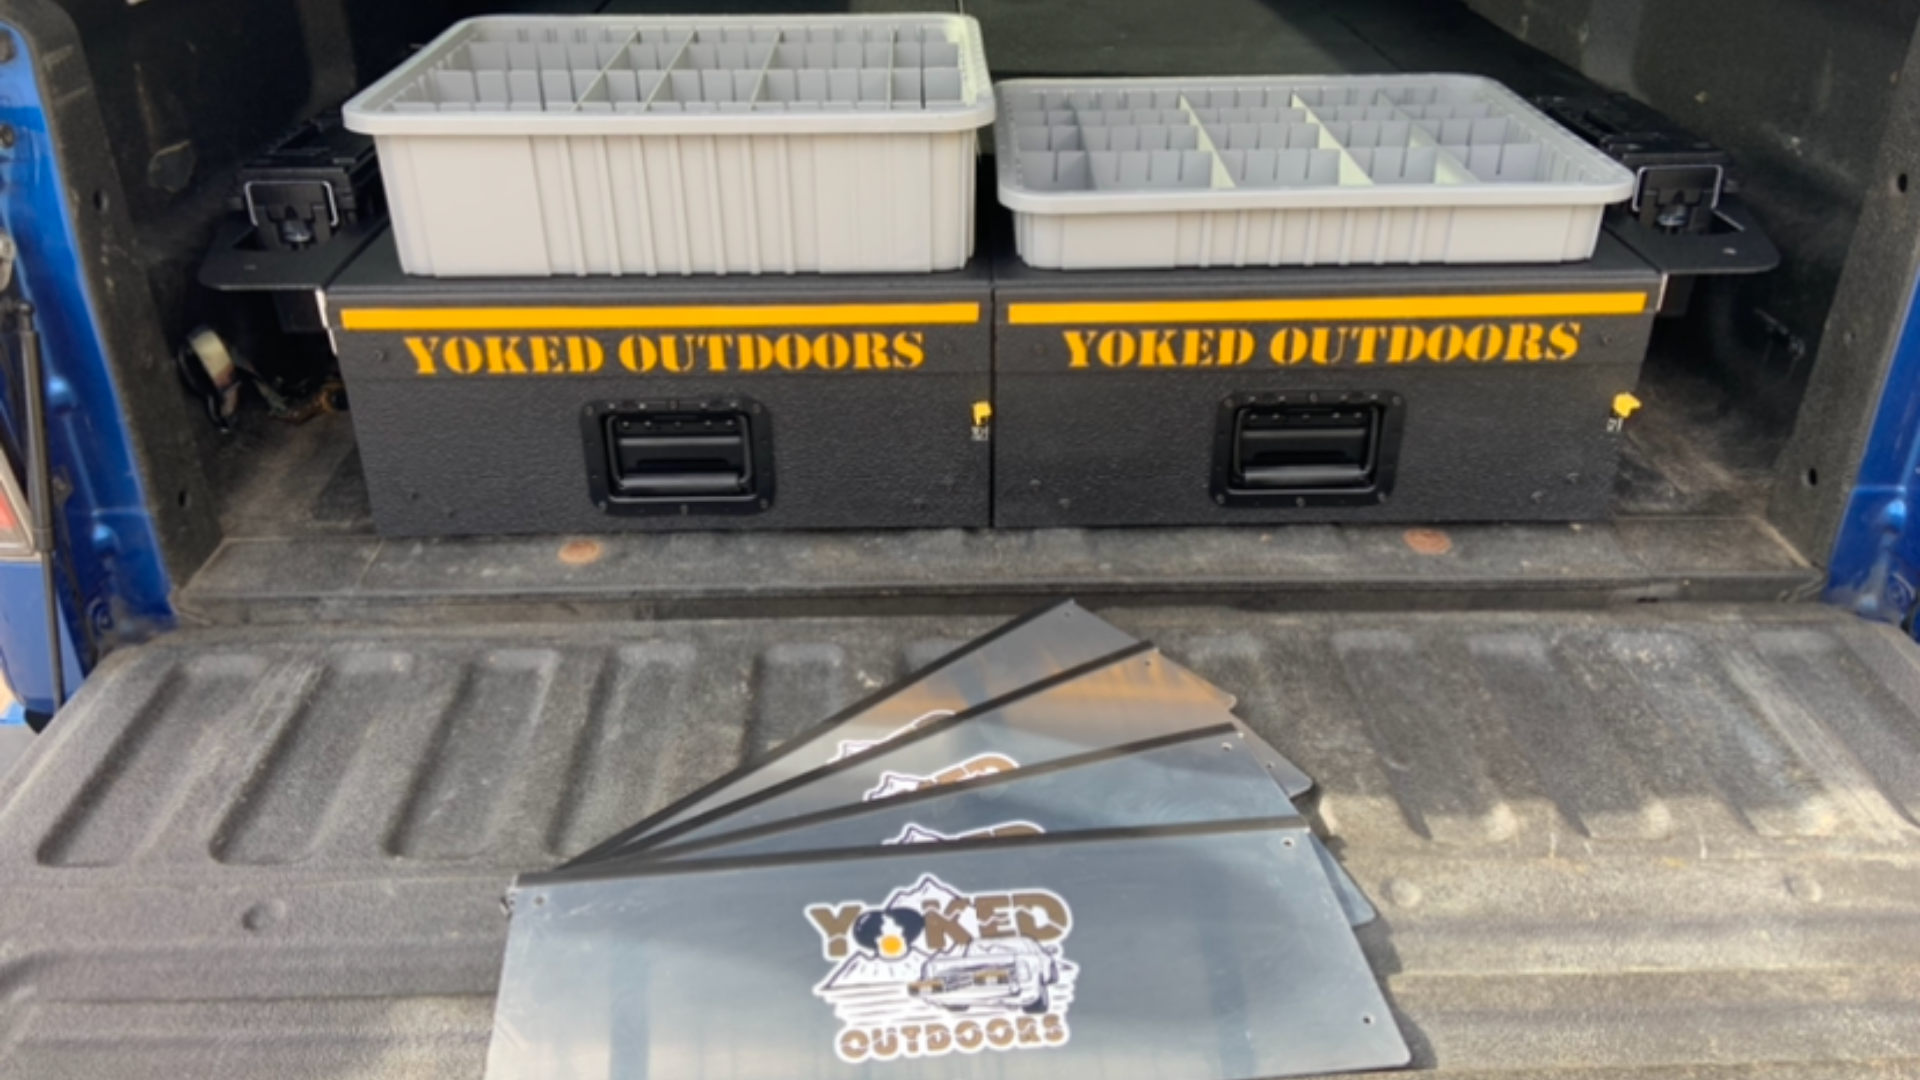 Yoked Outdoors Organized Truck Bed Drawer System Drawer dividers tool-less install